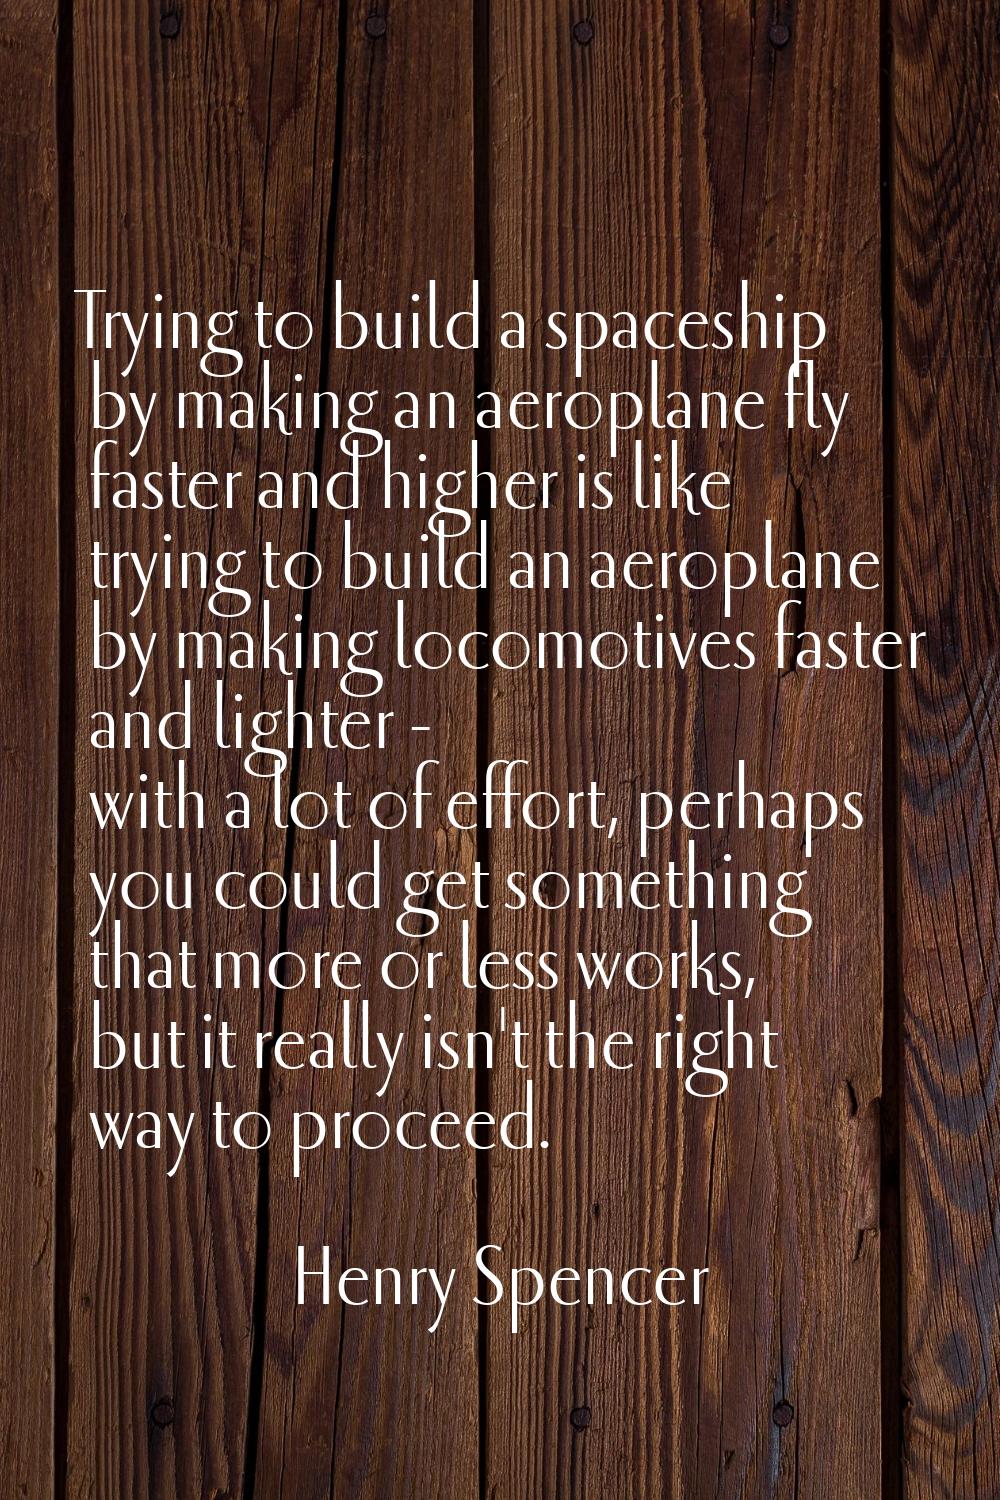 Trying to build a spaceship by making an aeroplane fly faster and higher is like trying to build an